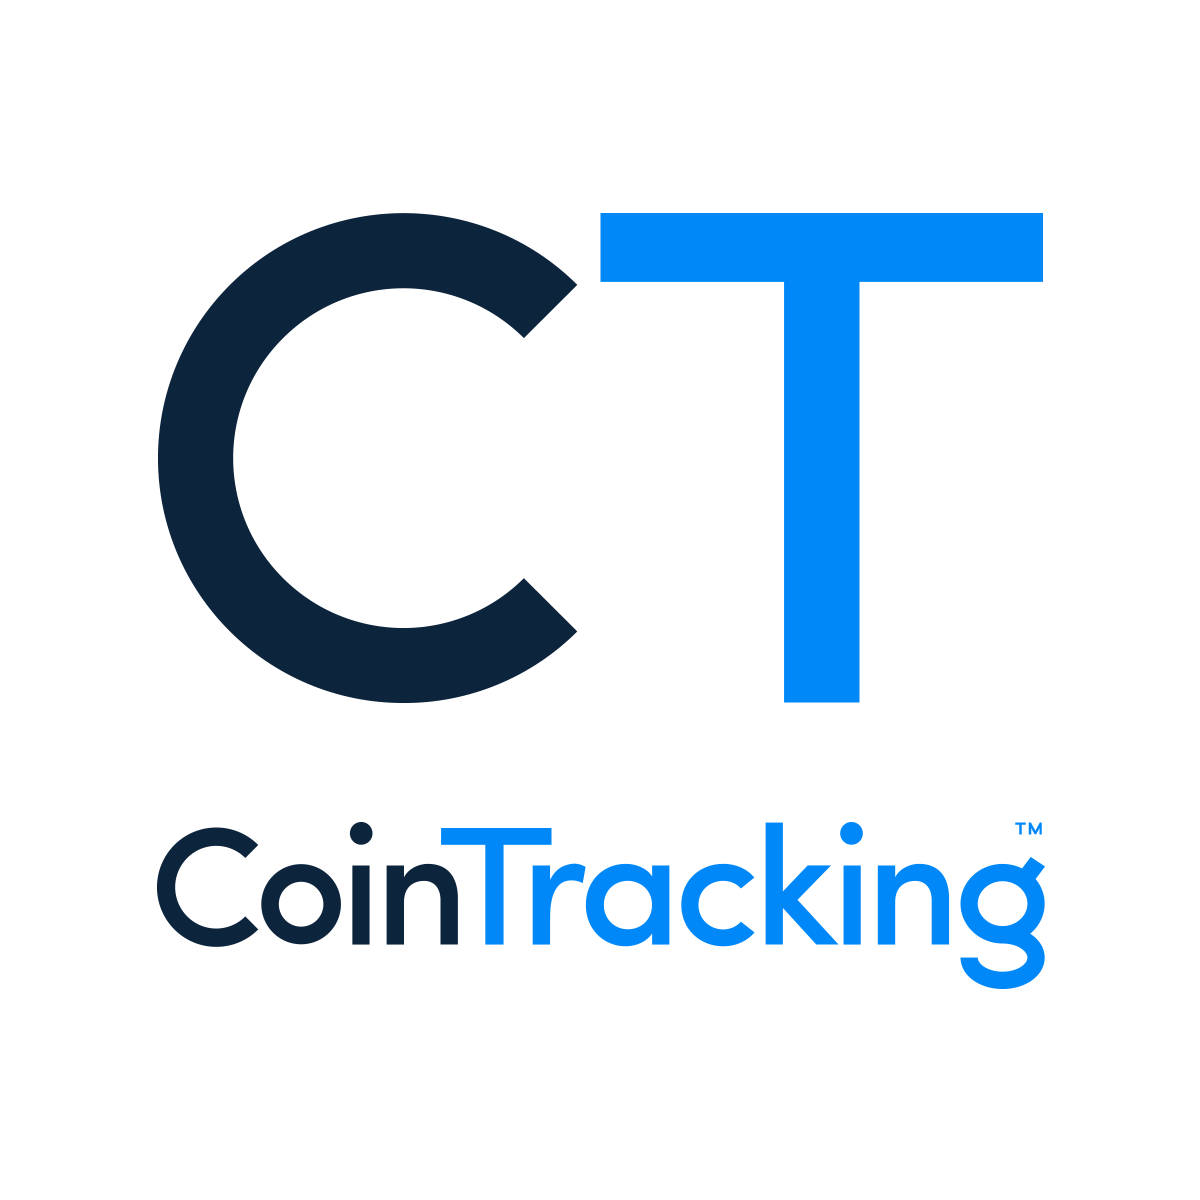 <a href="https://cointracking.info/" target="_blank">www.cointracking.info </a>